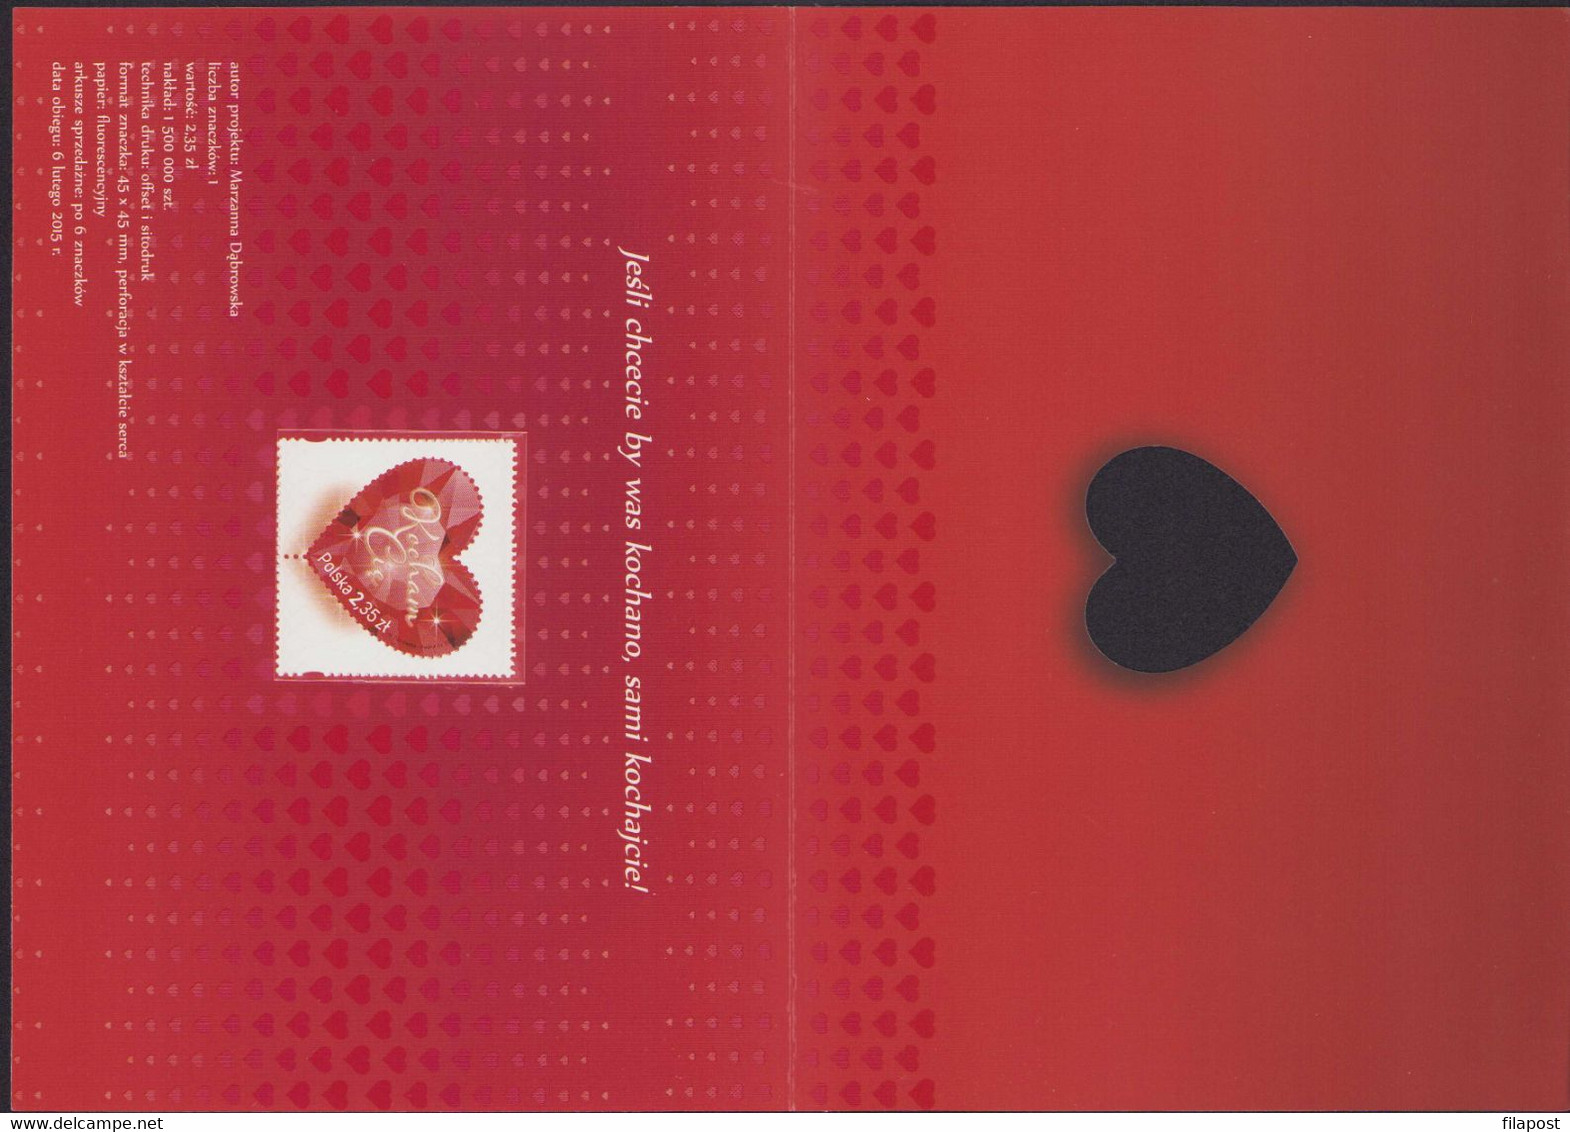 Poland 2015 Mini Booklet / I Love You Valentines Day Celebrations, Heart / With Stamp MNH**FV - Booklets